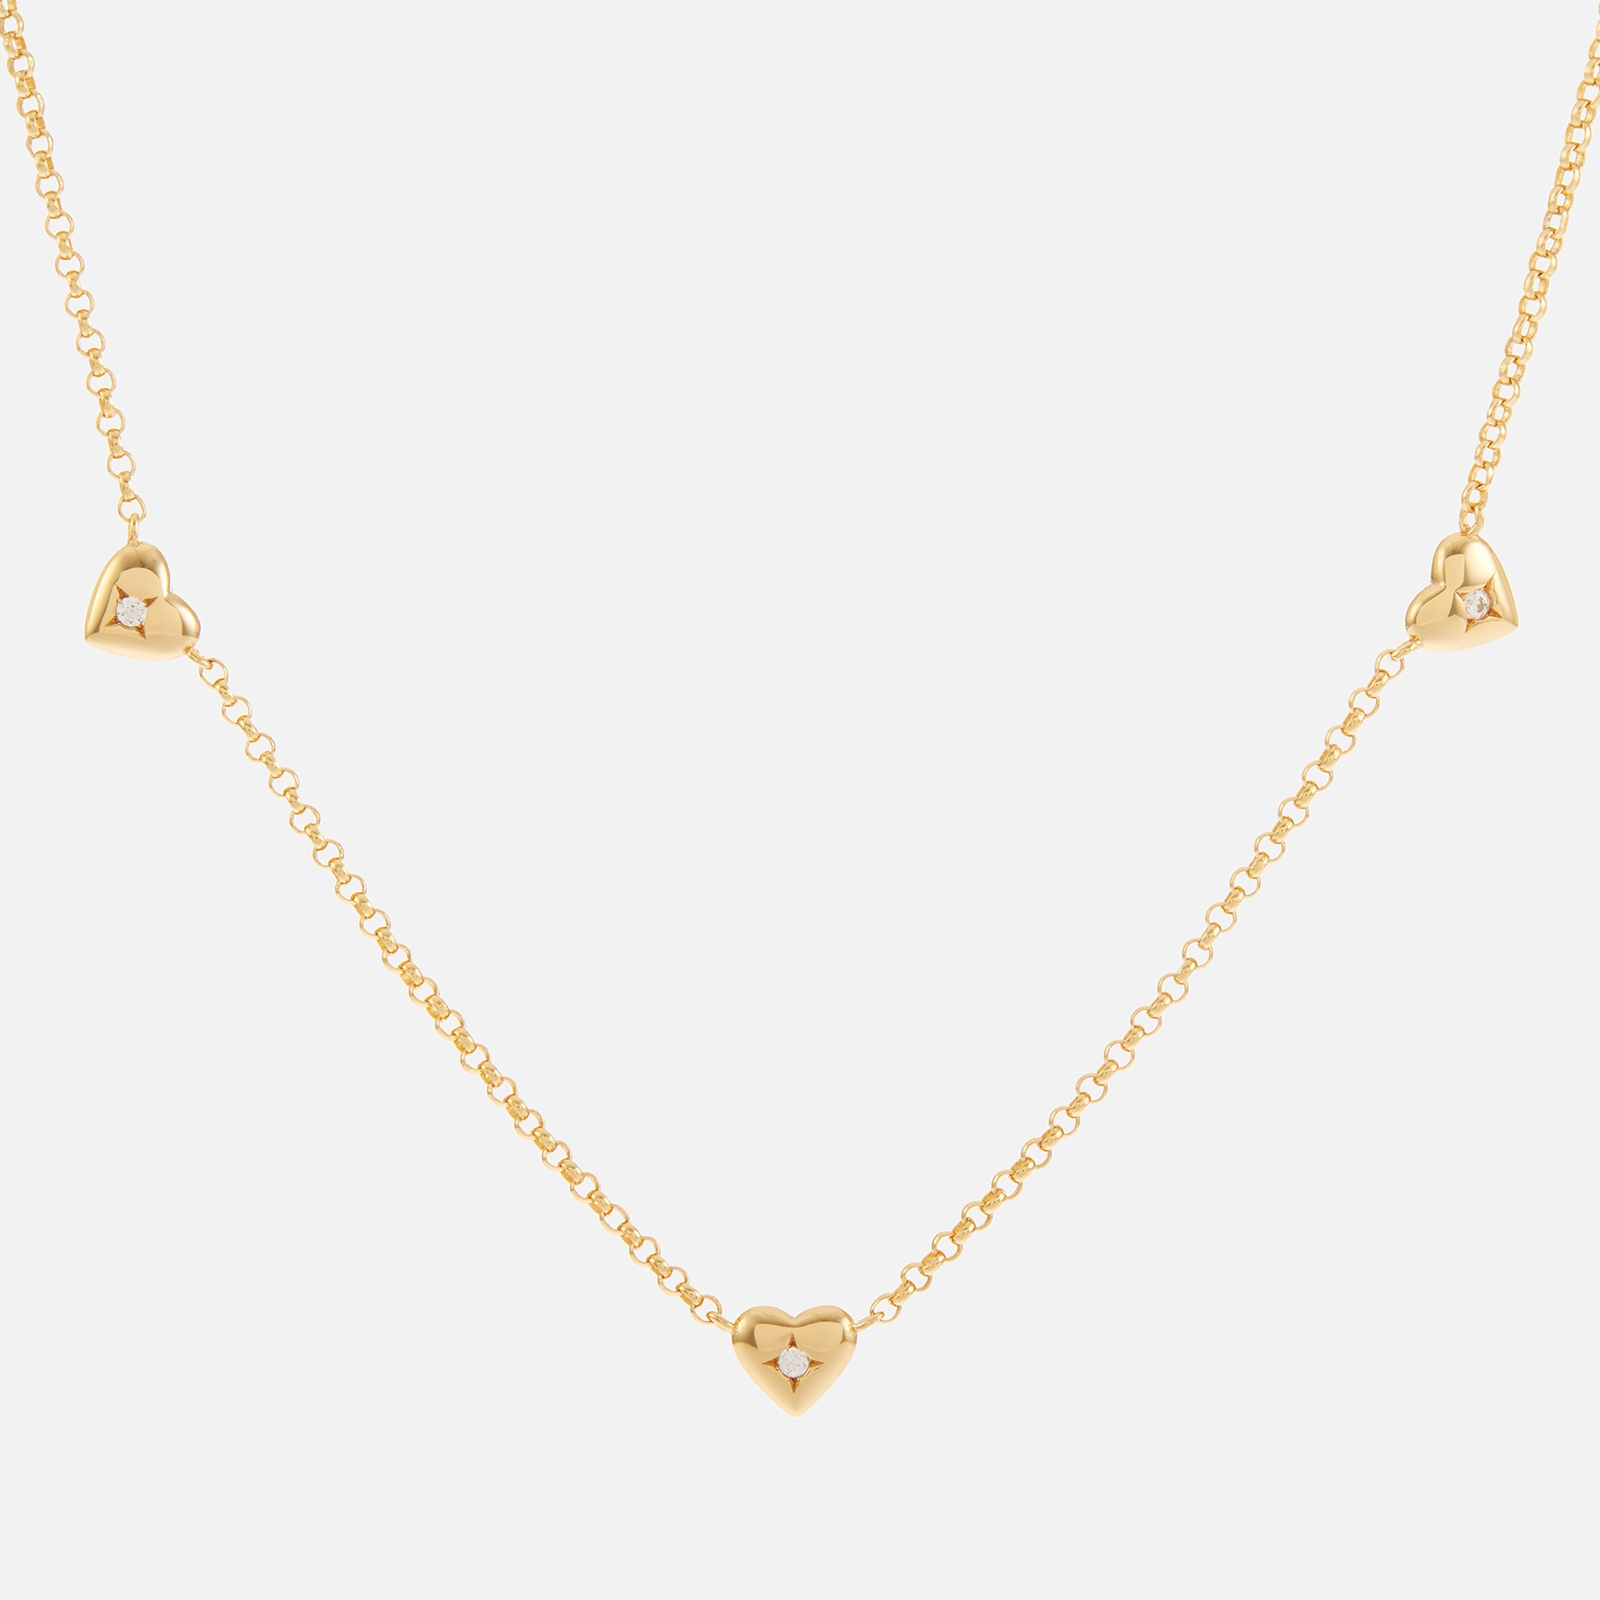 Astrid & Miyu Heart 18K Gold-Plated Sterling Silver Charm Necklace